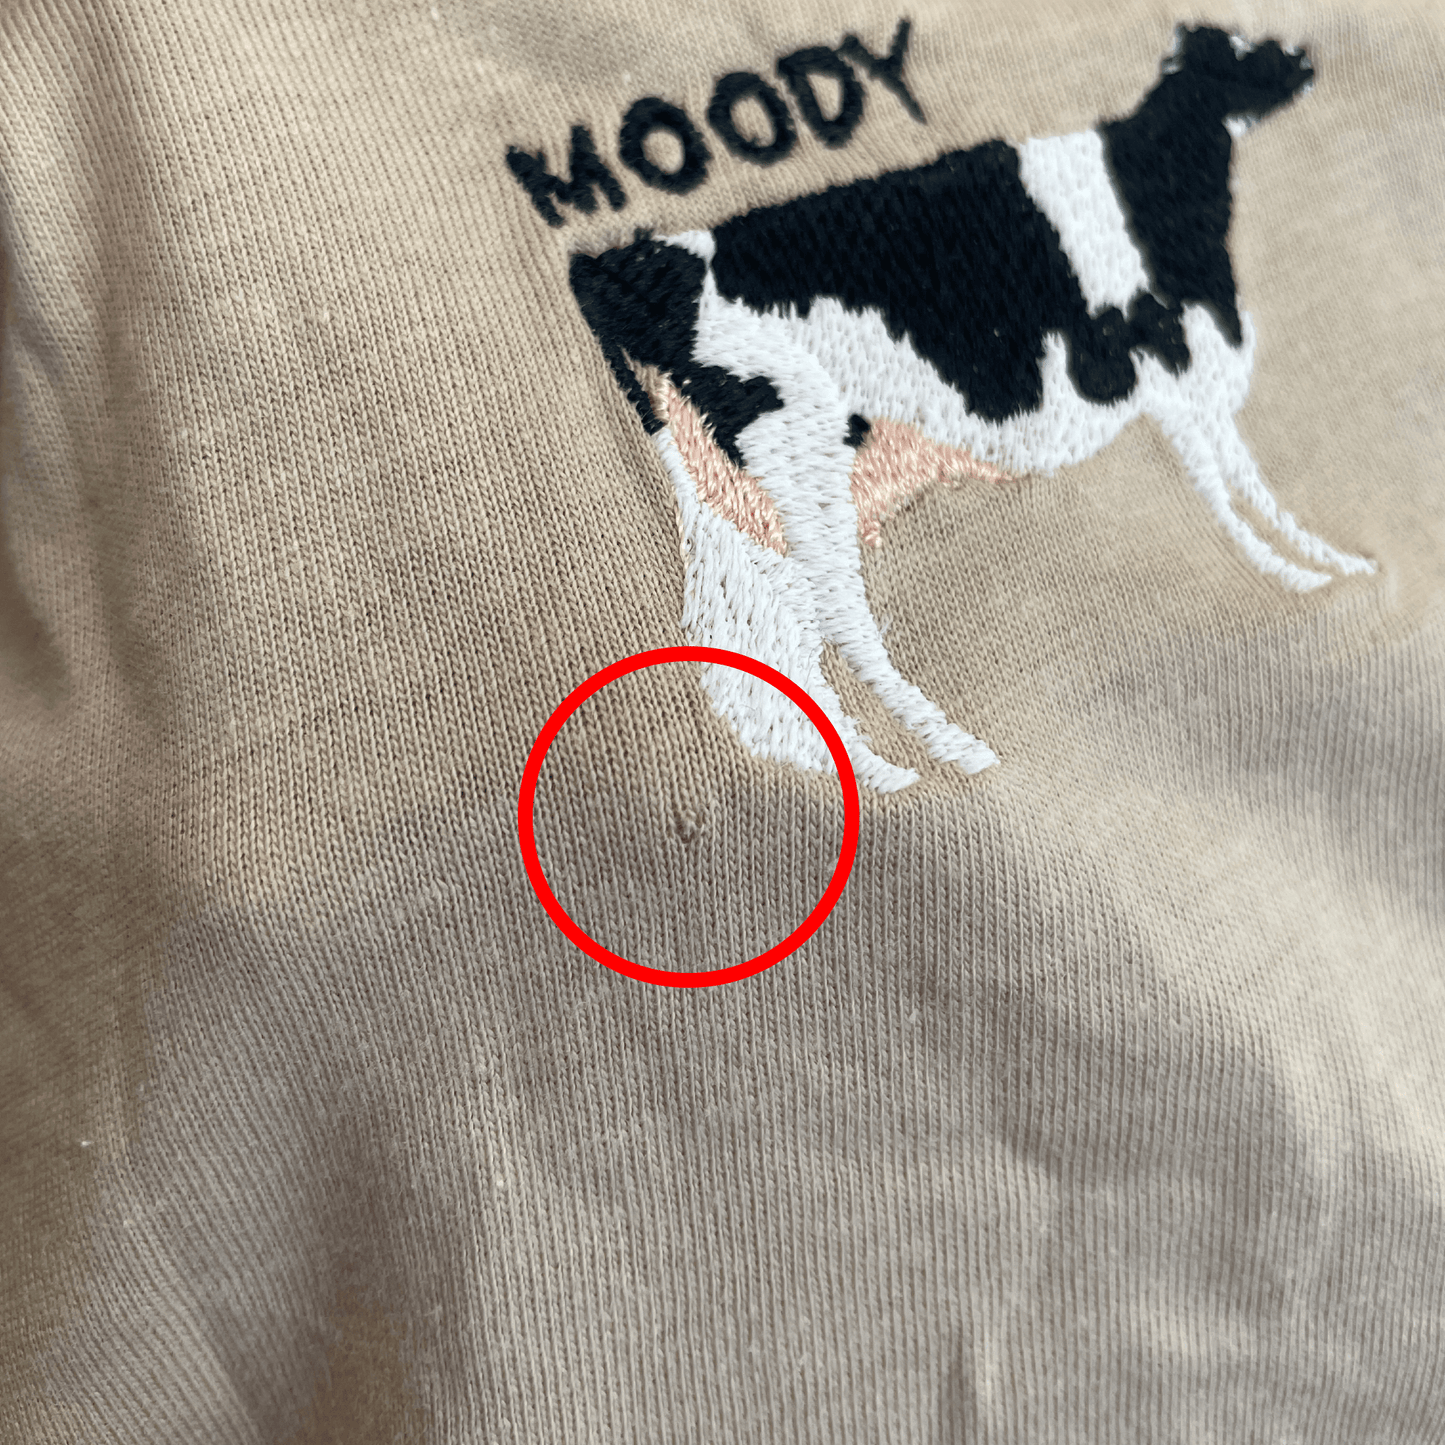 05_ Moody Cow XL - DEFECT - Small hole near tail